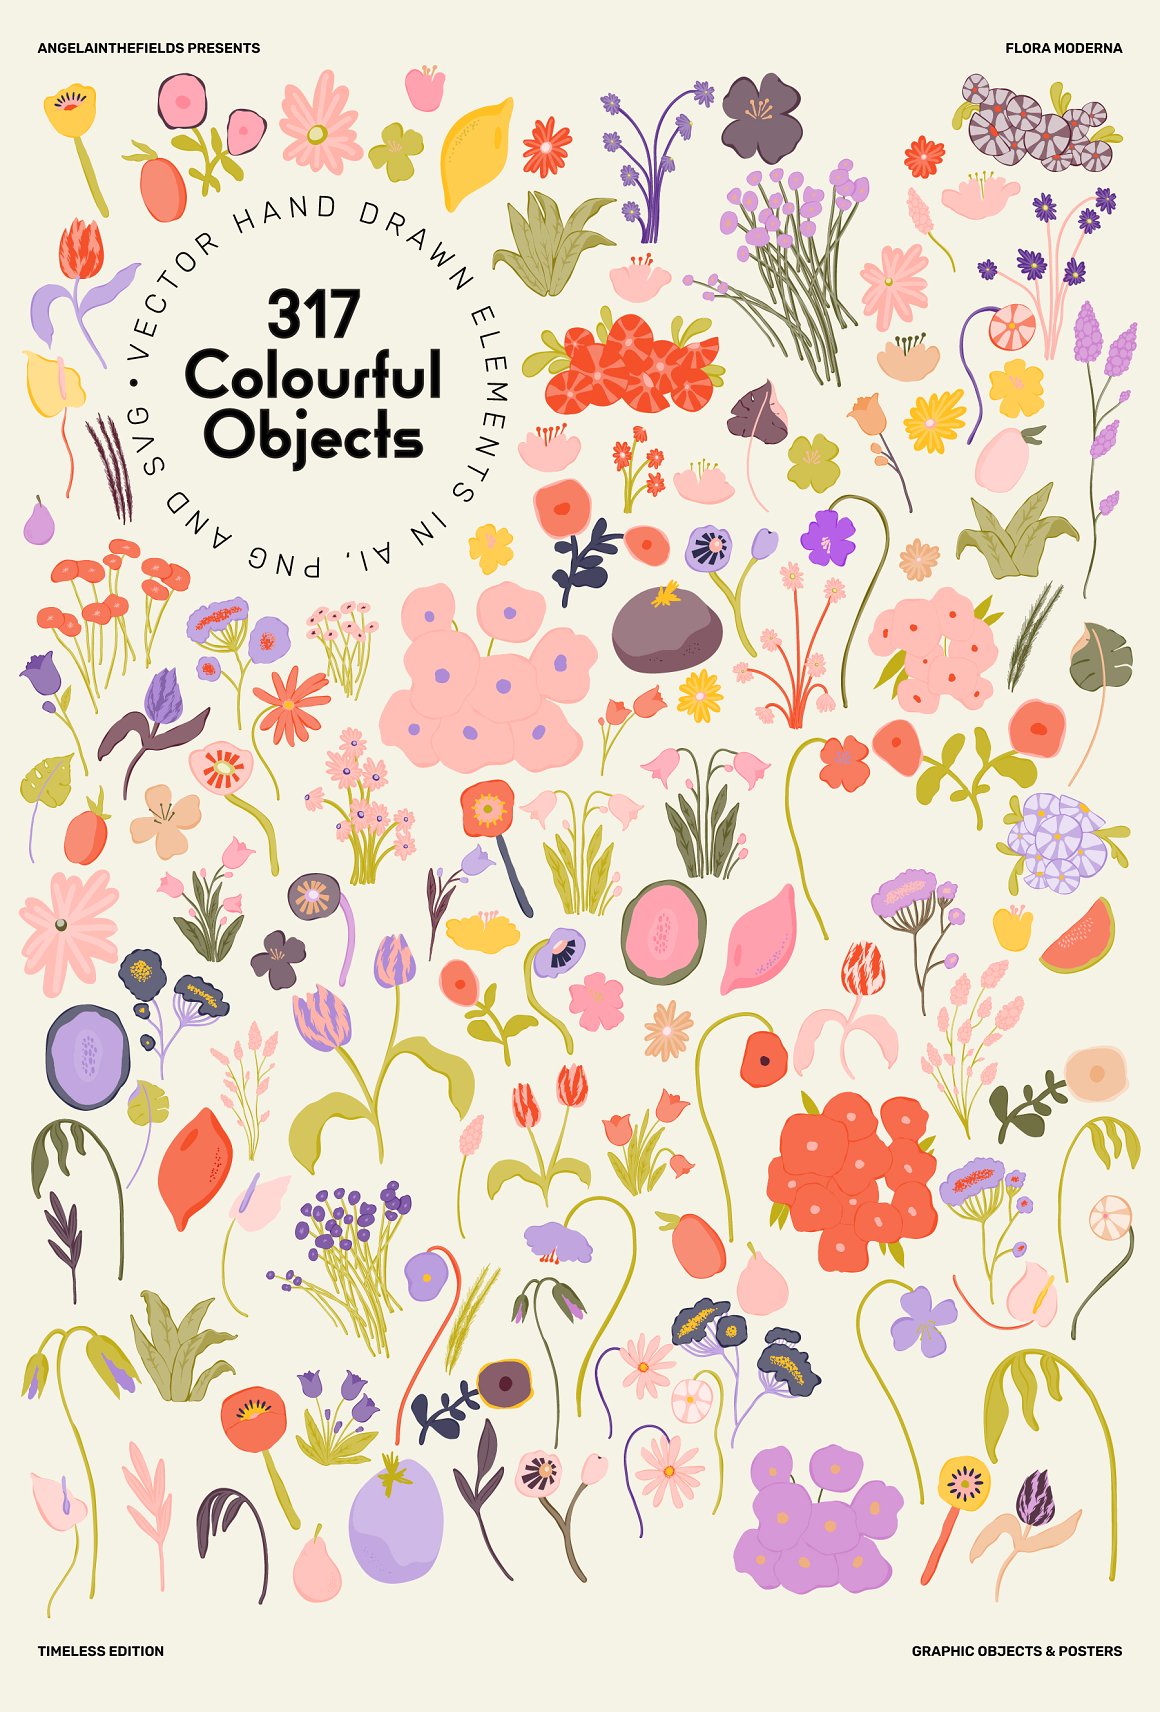 A set of 317 flora moderna illustrations in different colors.